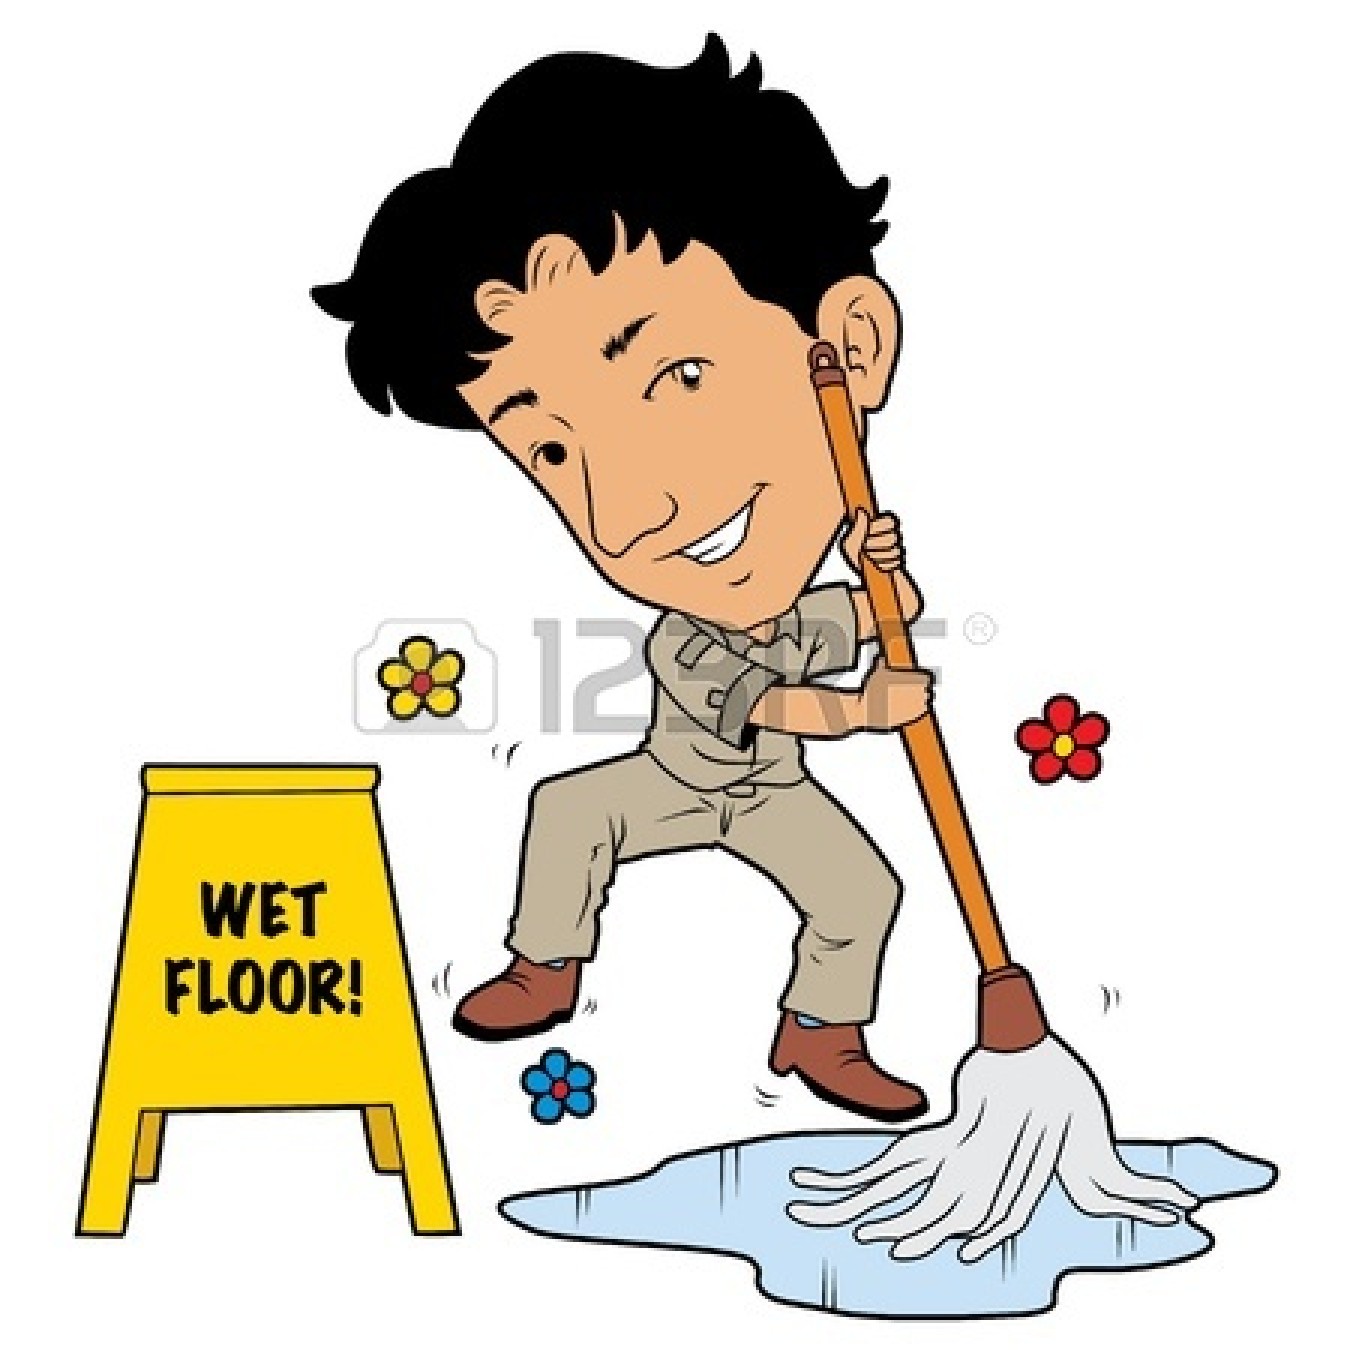 Sweeps The Floor View Large Photo Image Clipart   Free Clip Art Images